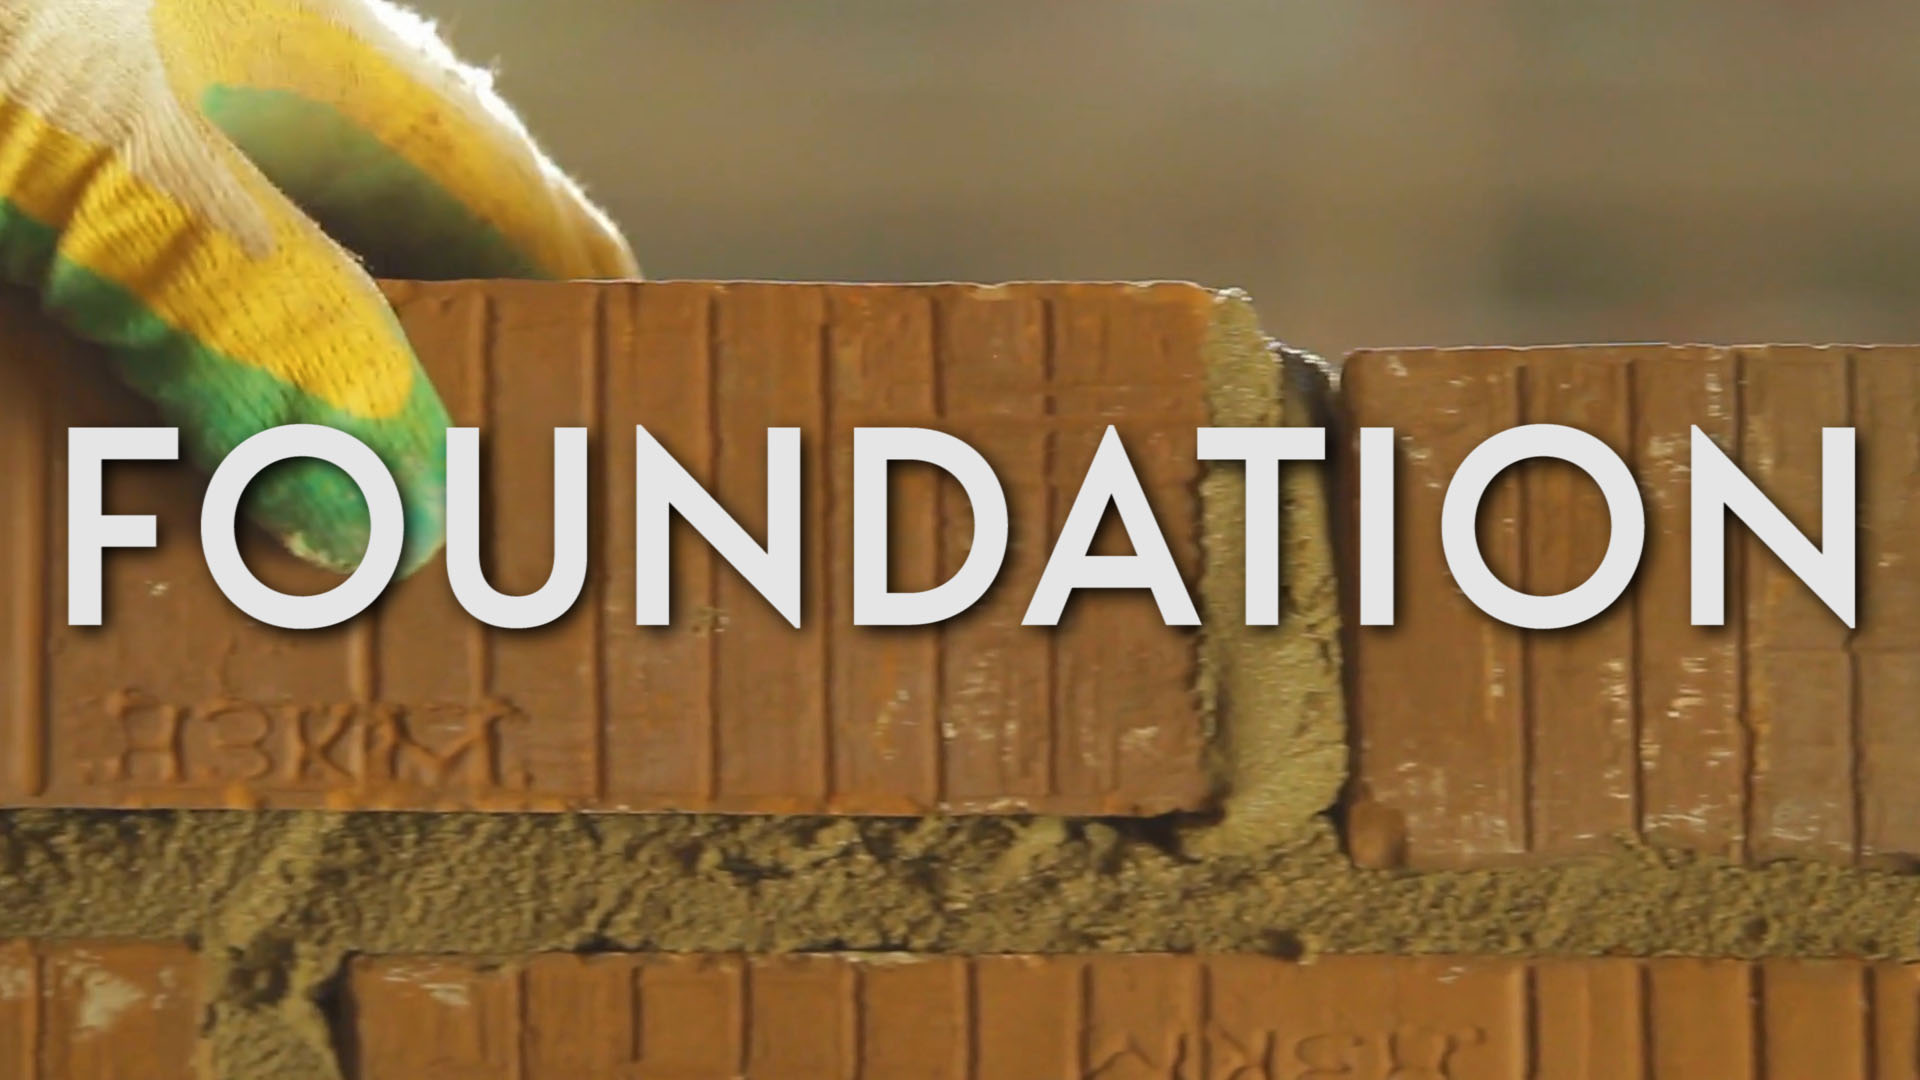 The Story of Soil and Foundations